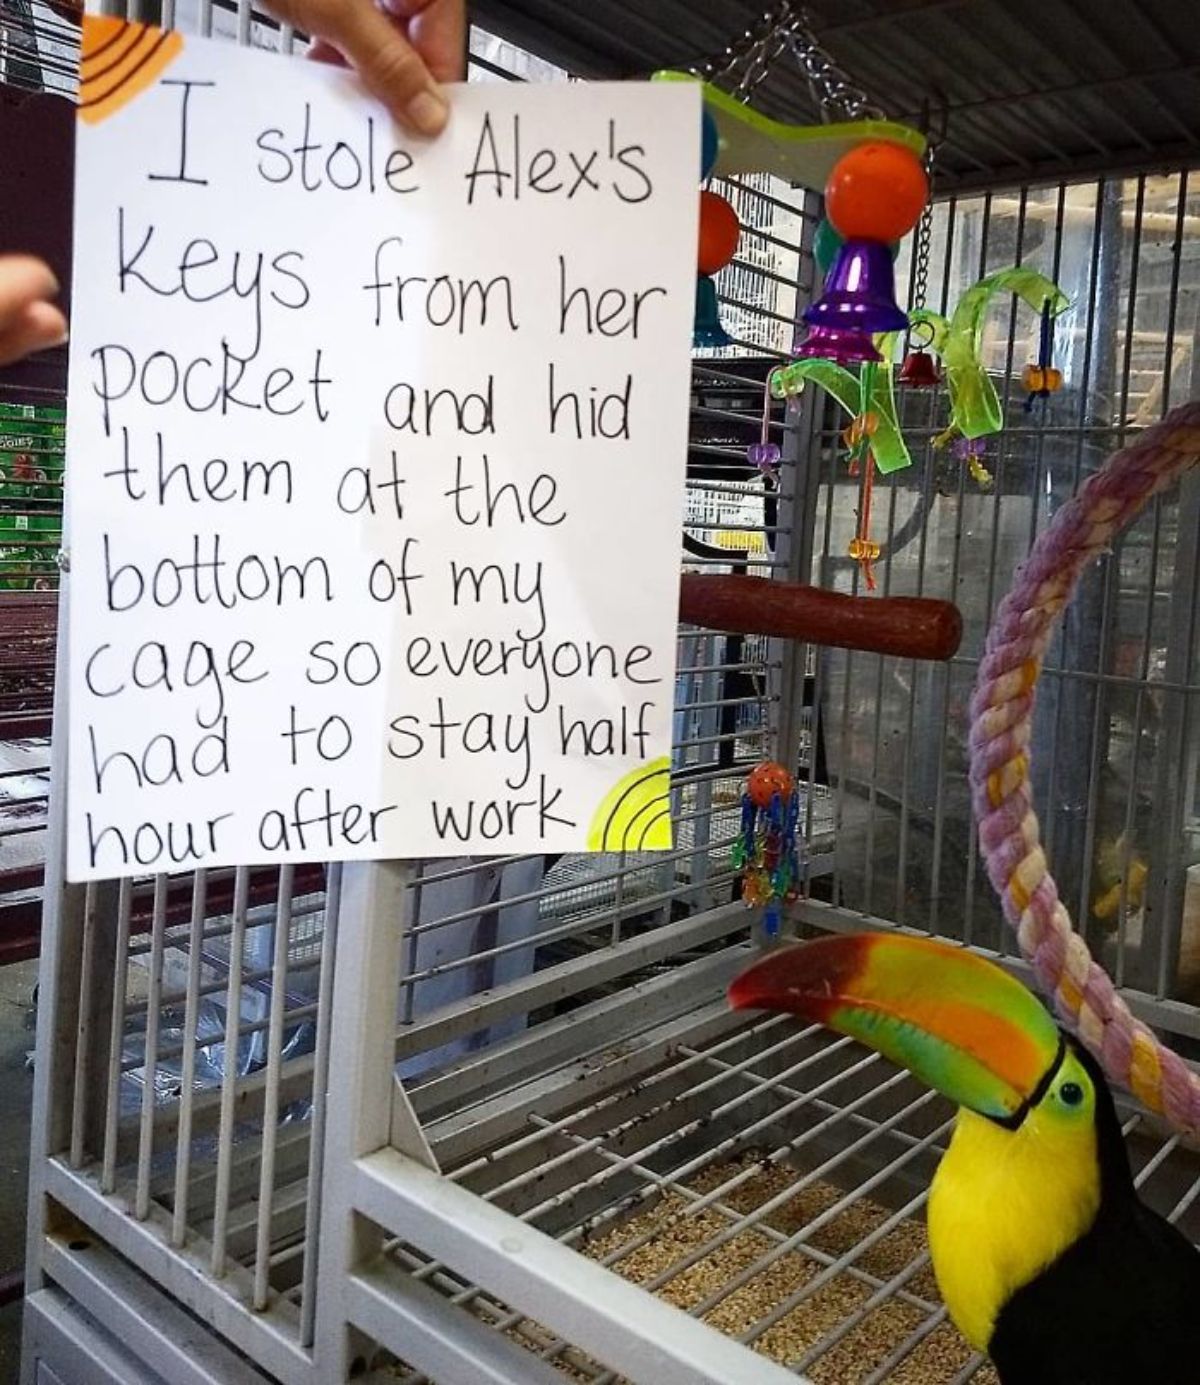 black and yellow toucan in the corner of a grey metal cage with a note saying the toucan stole Alex's keys and hid them so that everyone had to stay extra after work